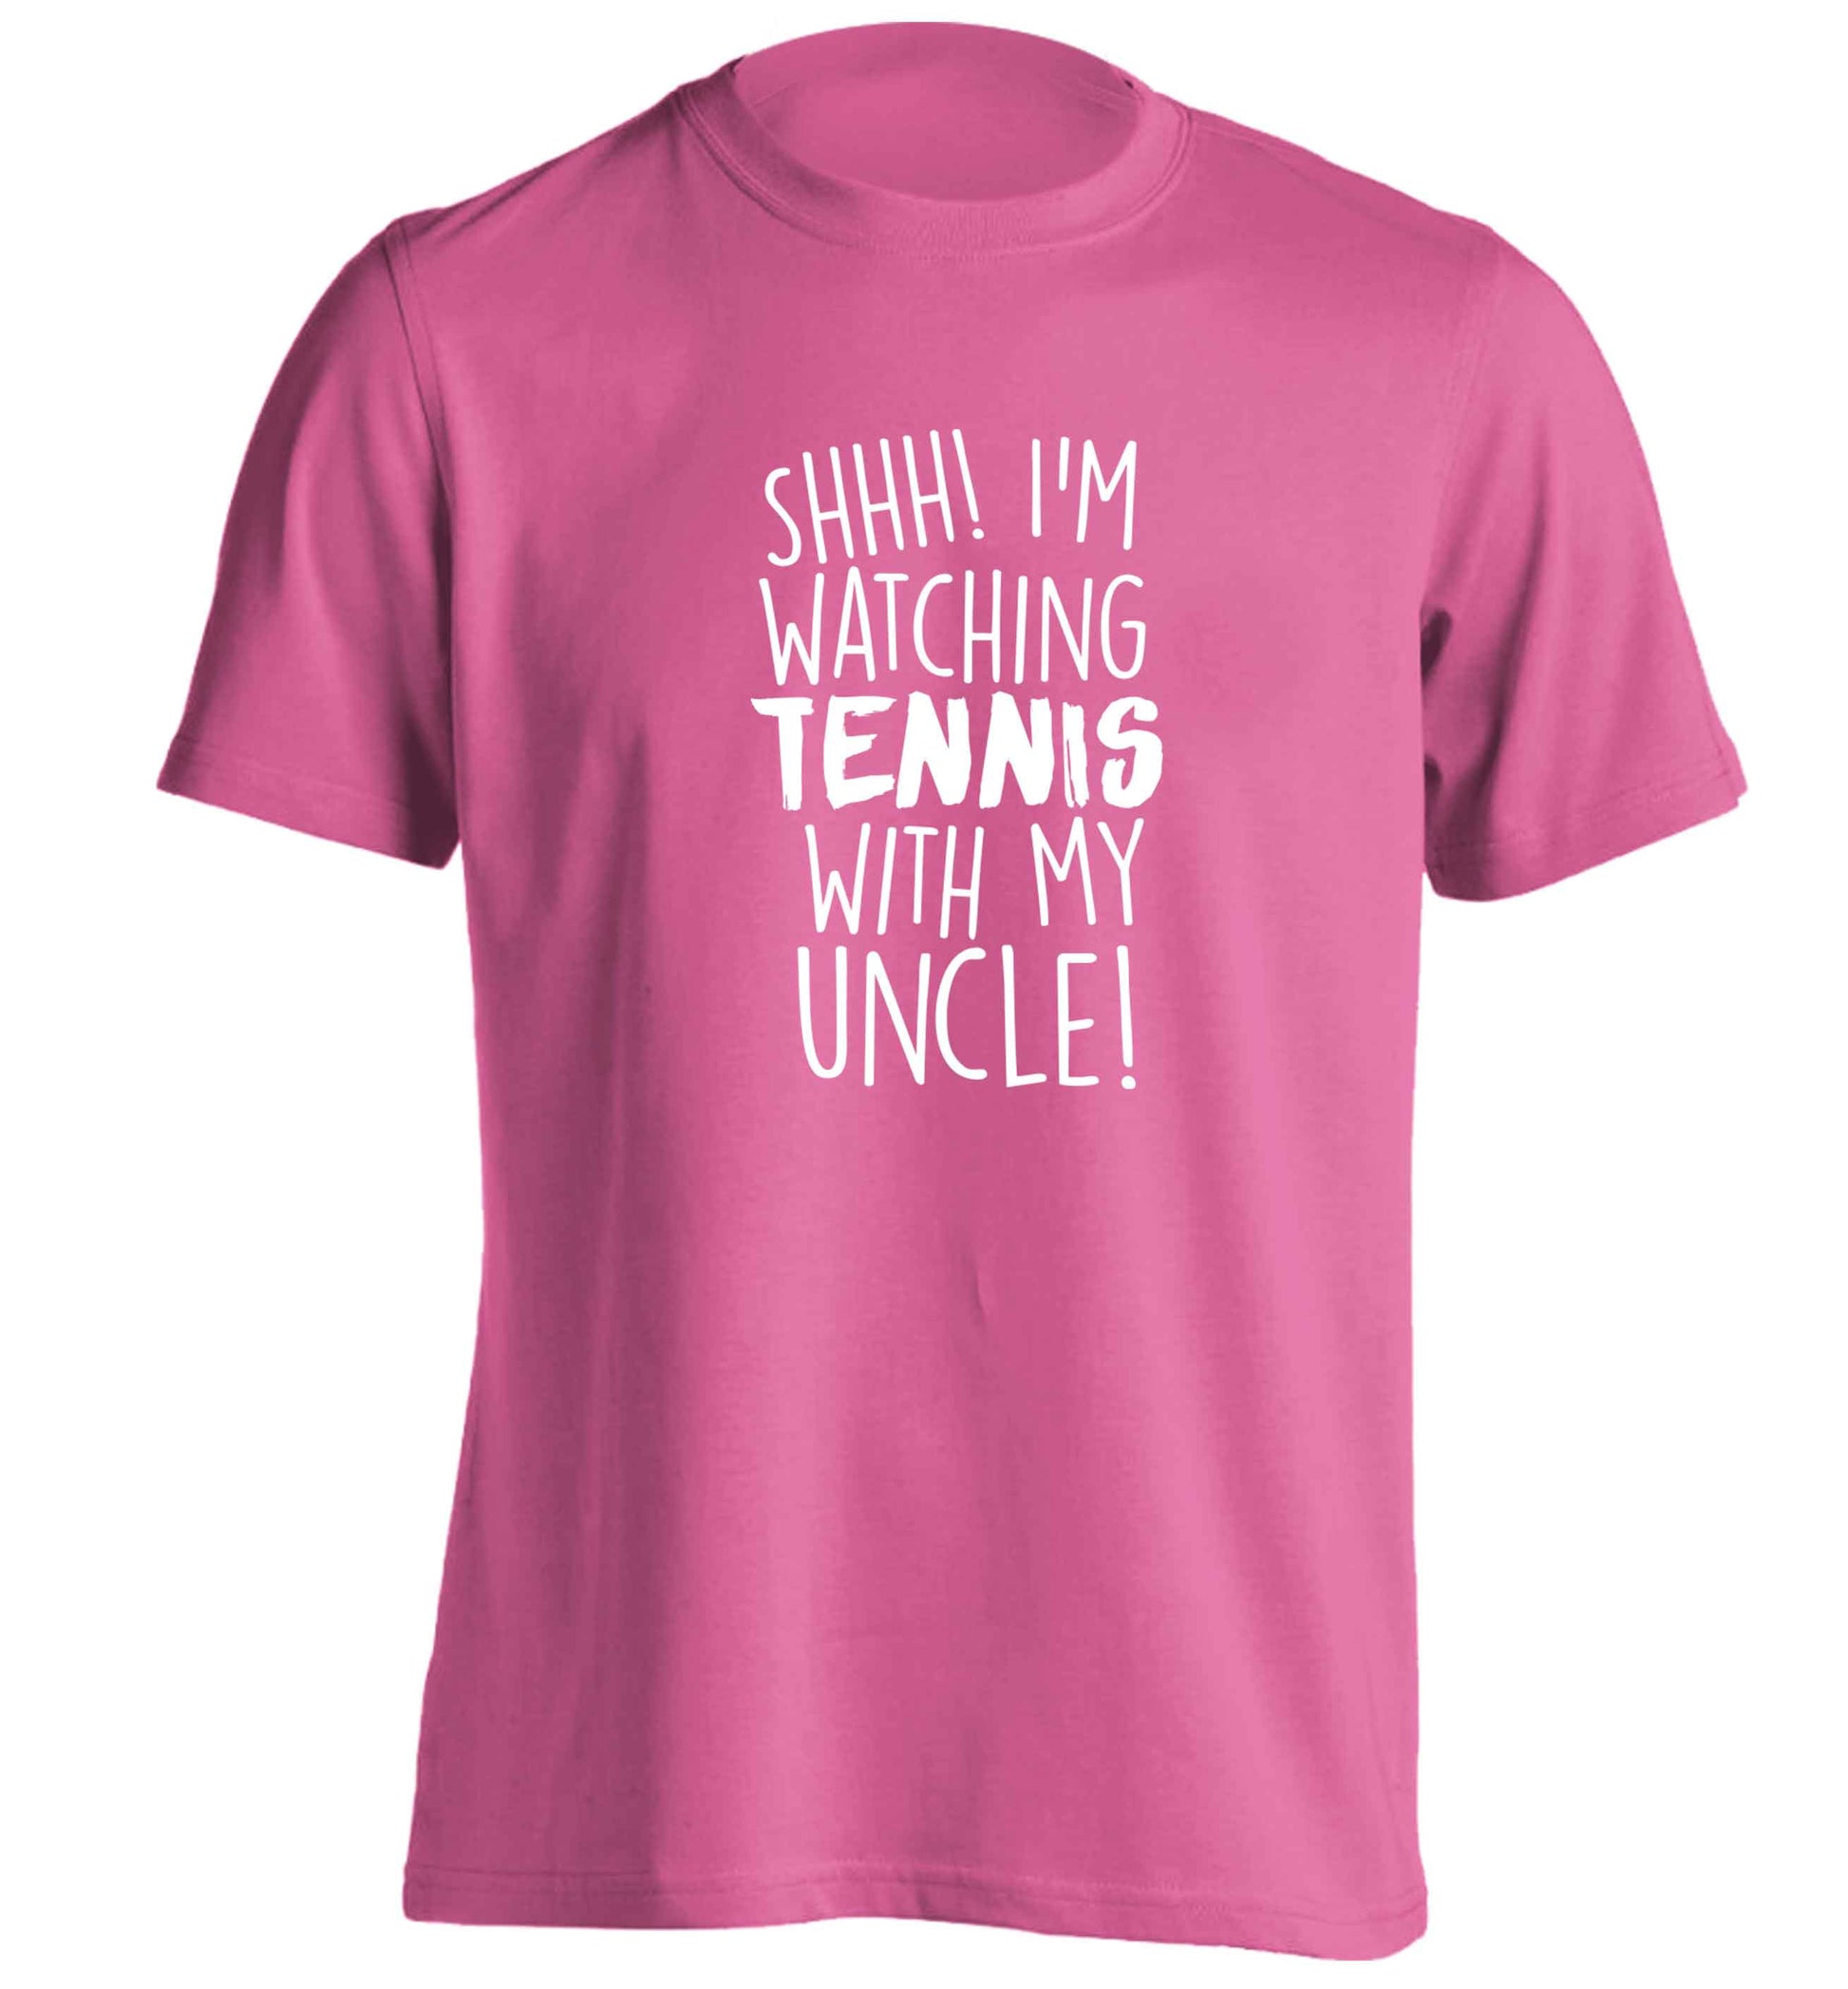 Shh! I'm watching tennis with my uncle! adults unisex pink Tshirt 2XL